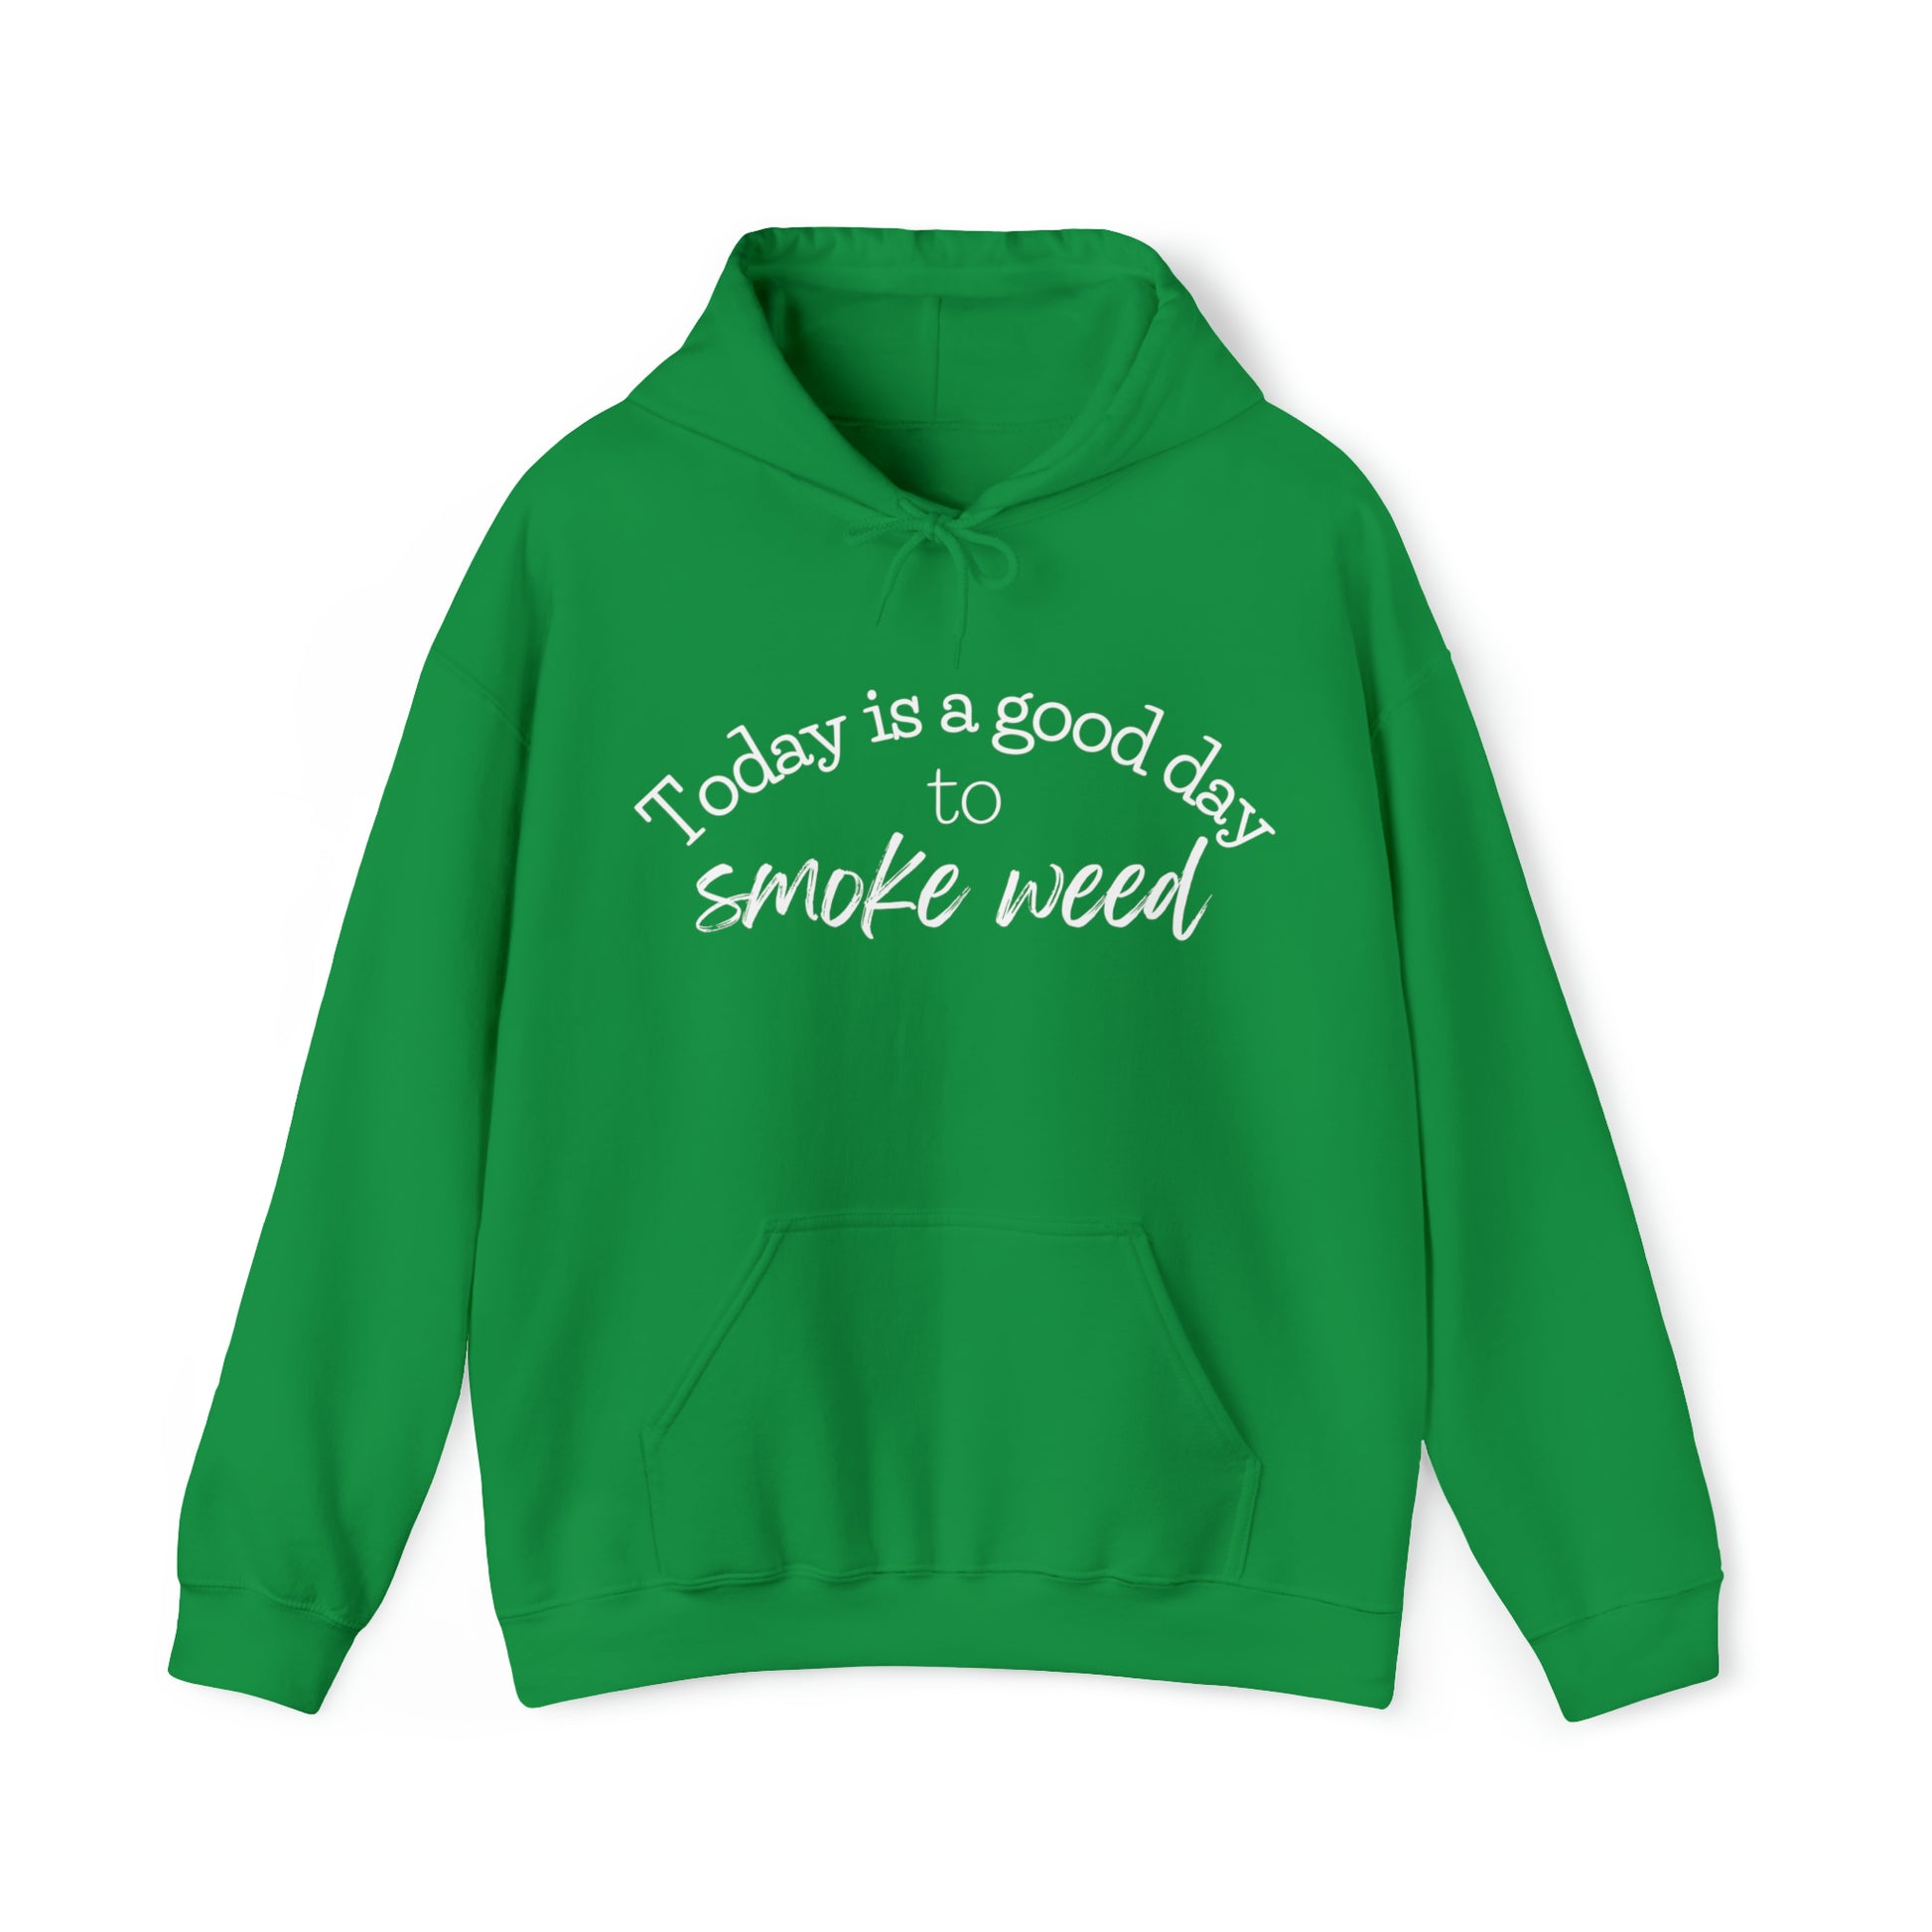 Irish Green Today is a Good Day to Smoke Weed Hoodie